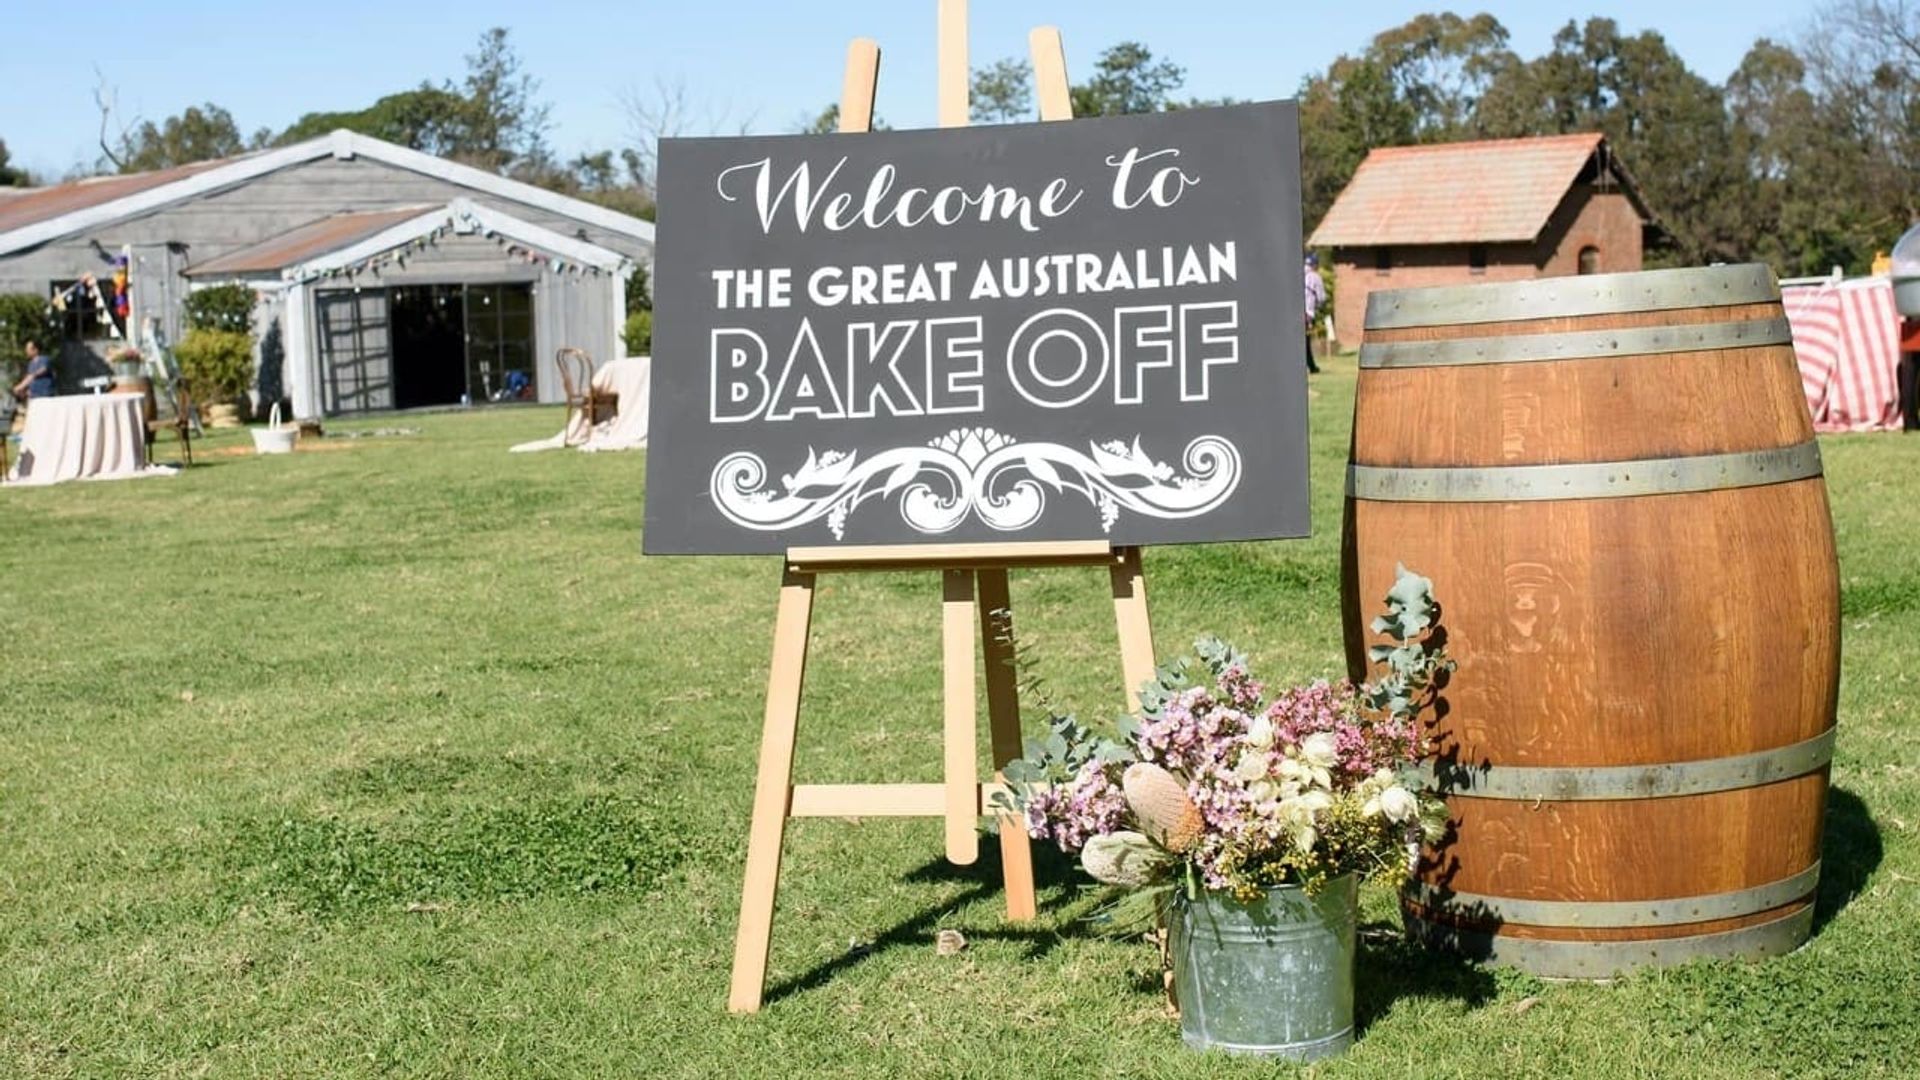 The Great Australian Bake Off background